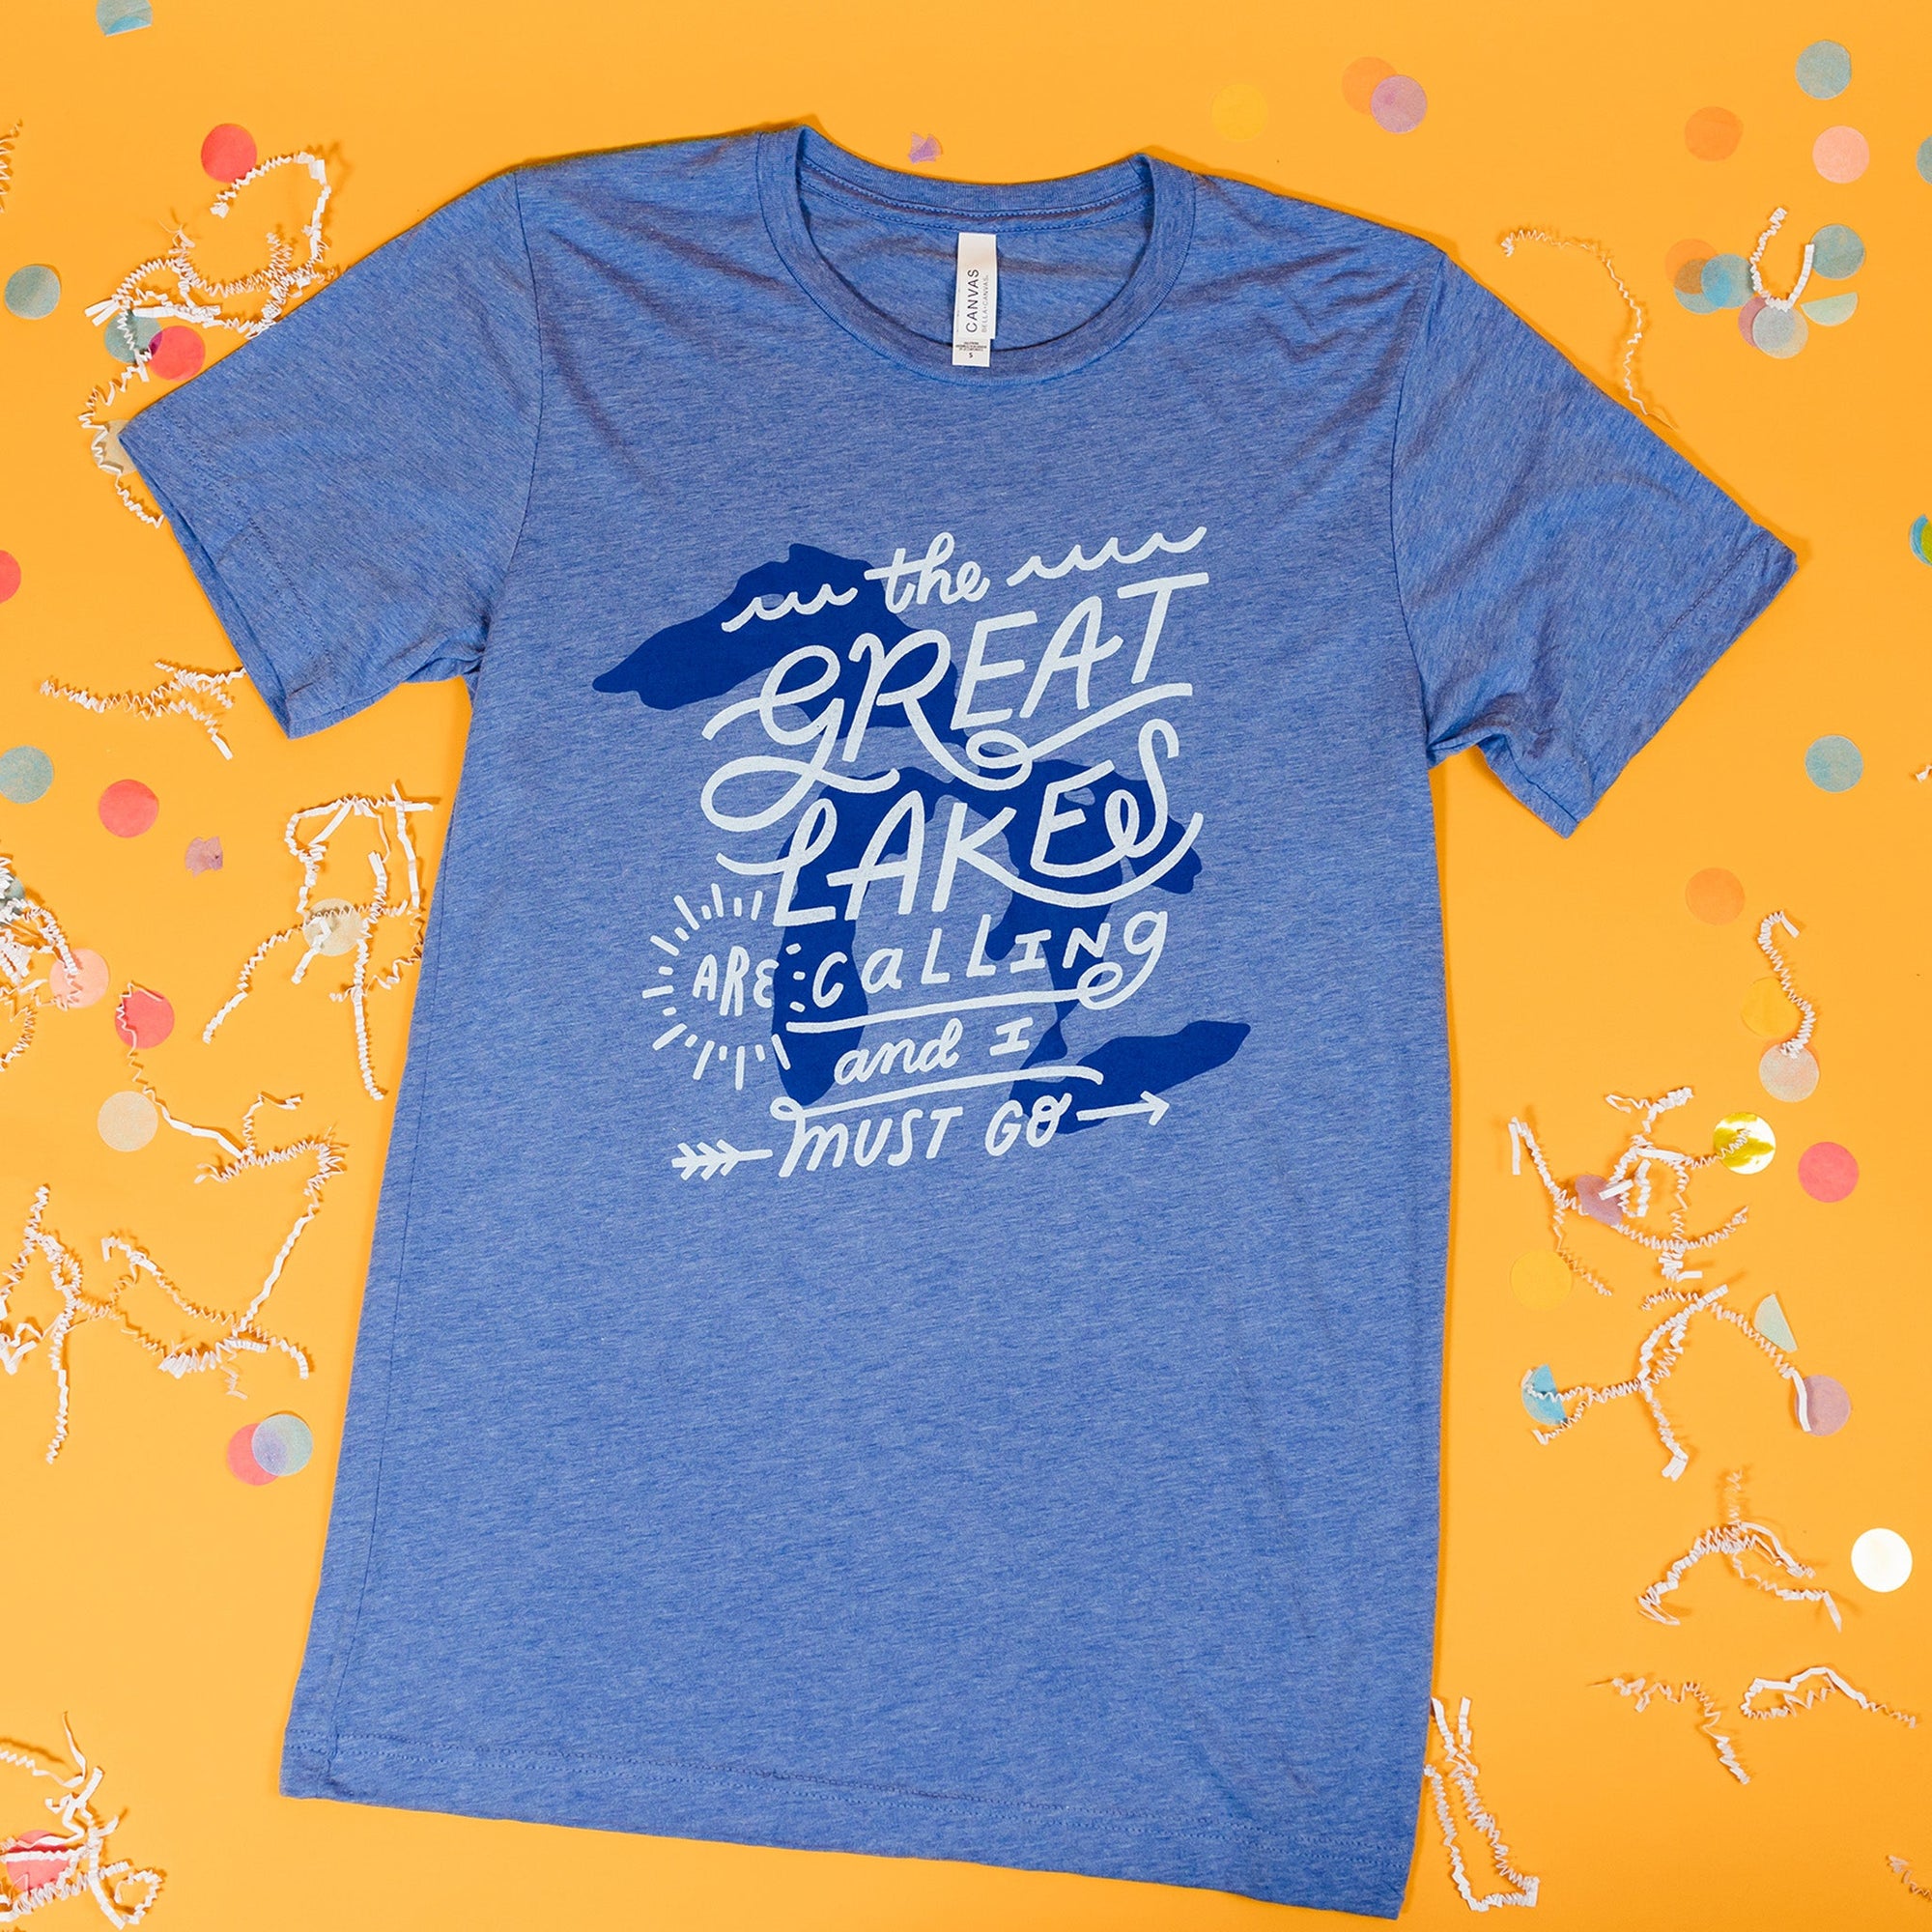 On a sunny mustard background sits a t-shirt with white crinkle and big, colorful confetti scattered around. This heather blue tee features an illustration of the Great Lakes printe in blue ink, with custom hand lettered script in white.